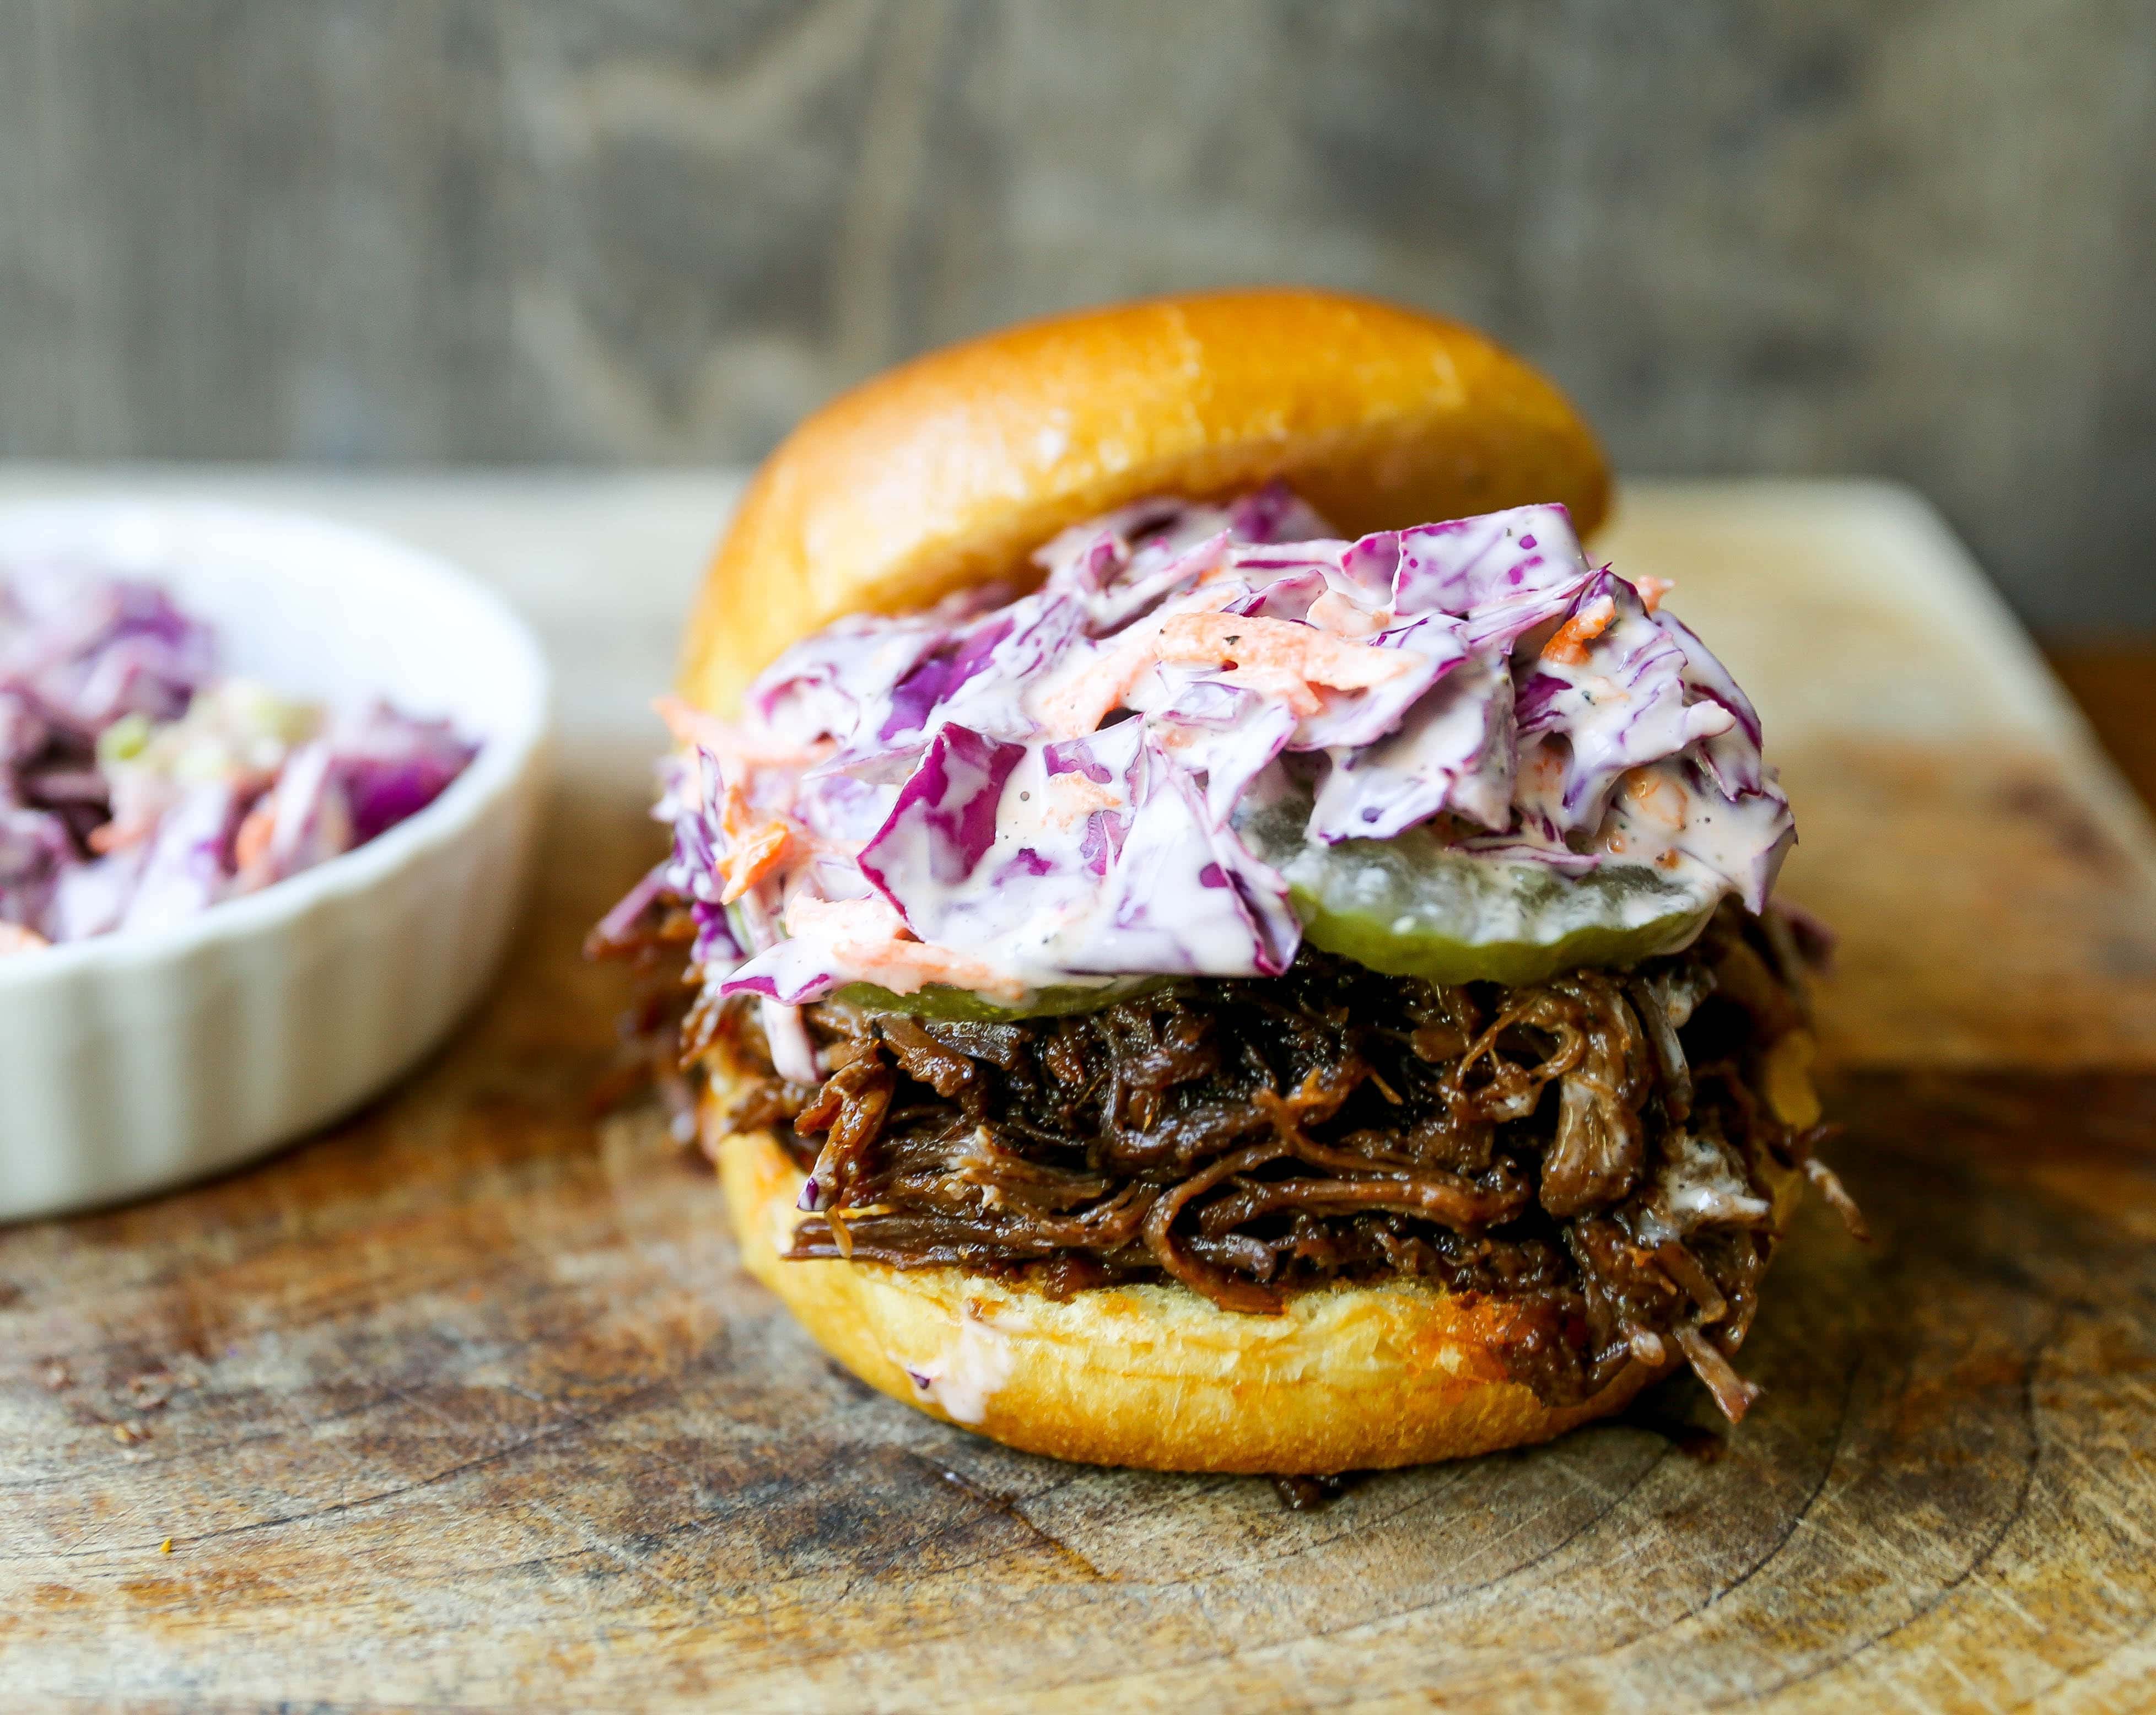 Slow Cooker BBQ Beef Sandwiches Tender seasoned slow cooked beef basted in BBQ sauce and sandwiched between brioche buns and topped with a crunchy coleslaw. www.modernhoney.com #bbqbeef #bbq #crockpot #slowcooker